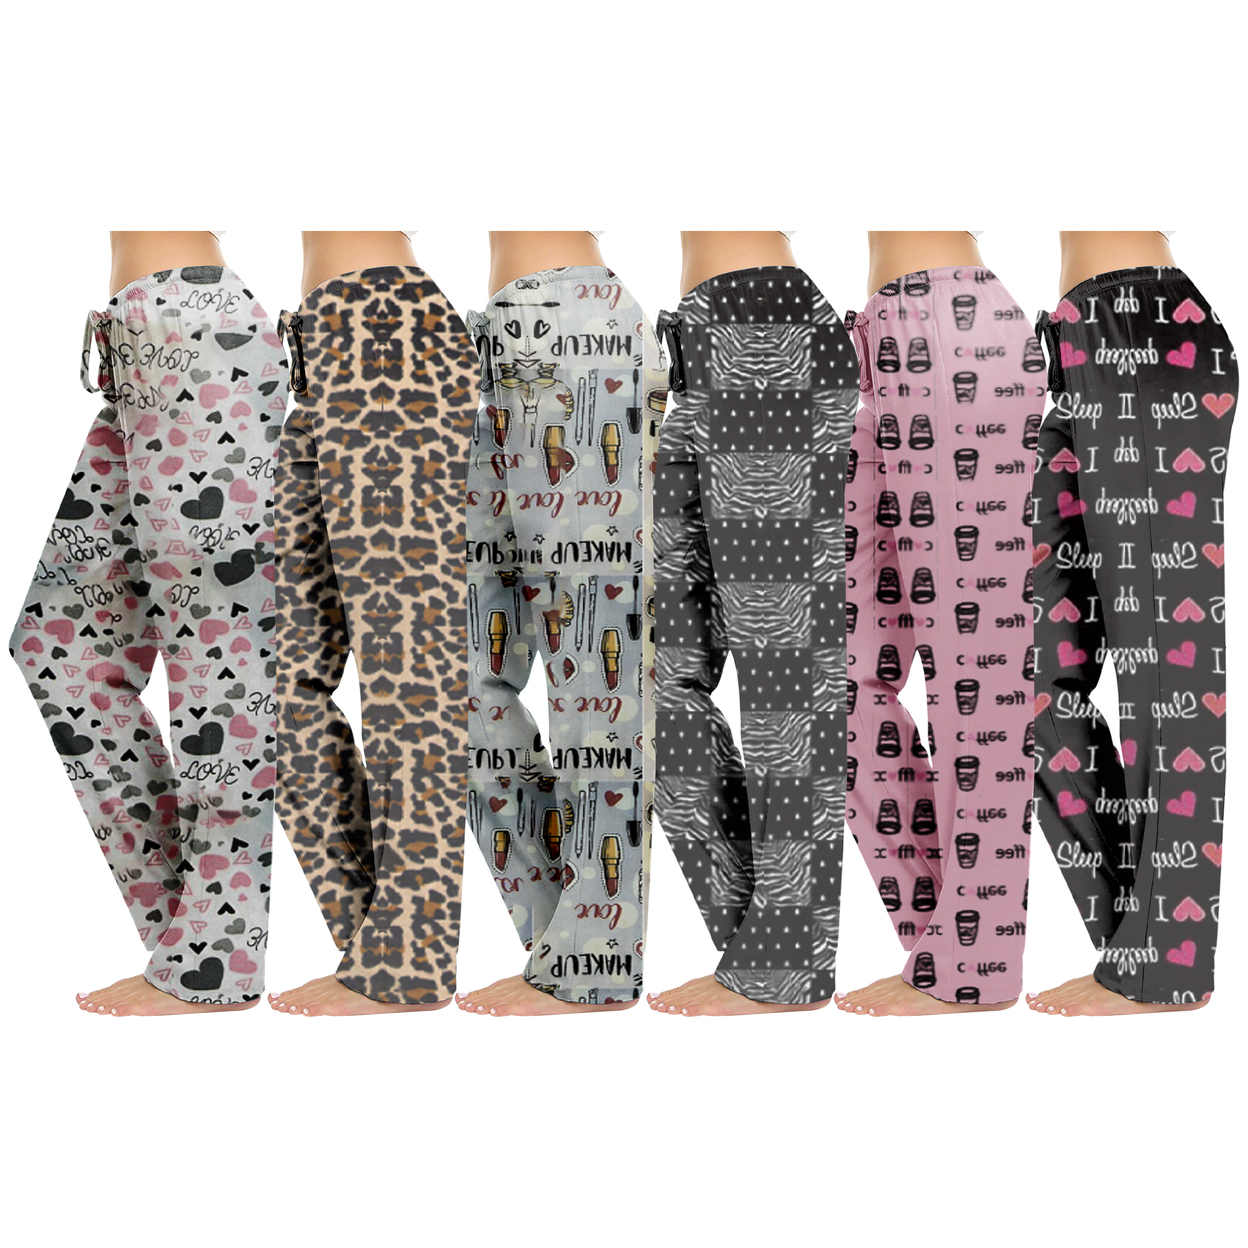 2-Pack: Women's Casual Fun Printed Lightweight Lounge Terry Knit Pajama Bottom Pants - Small, Shapes